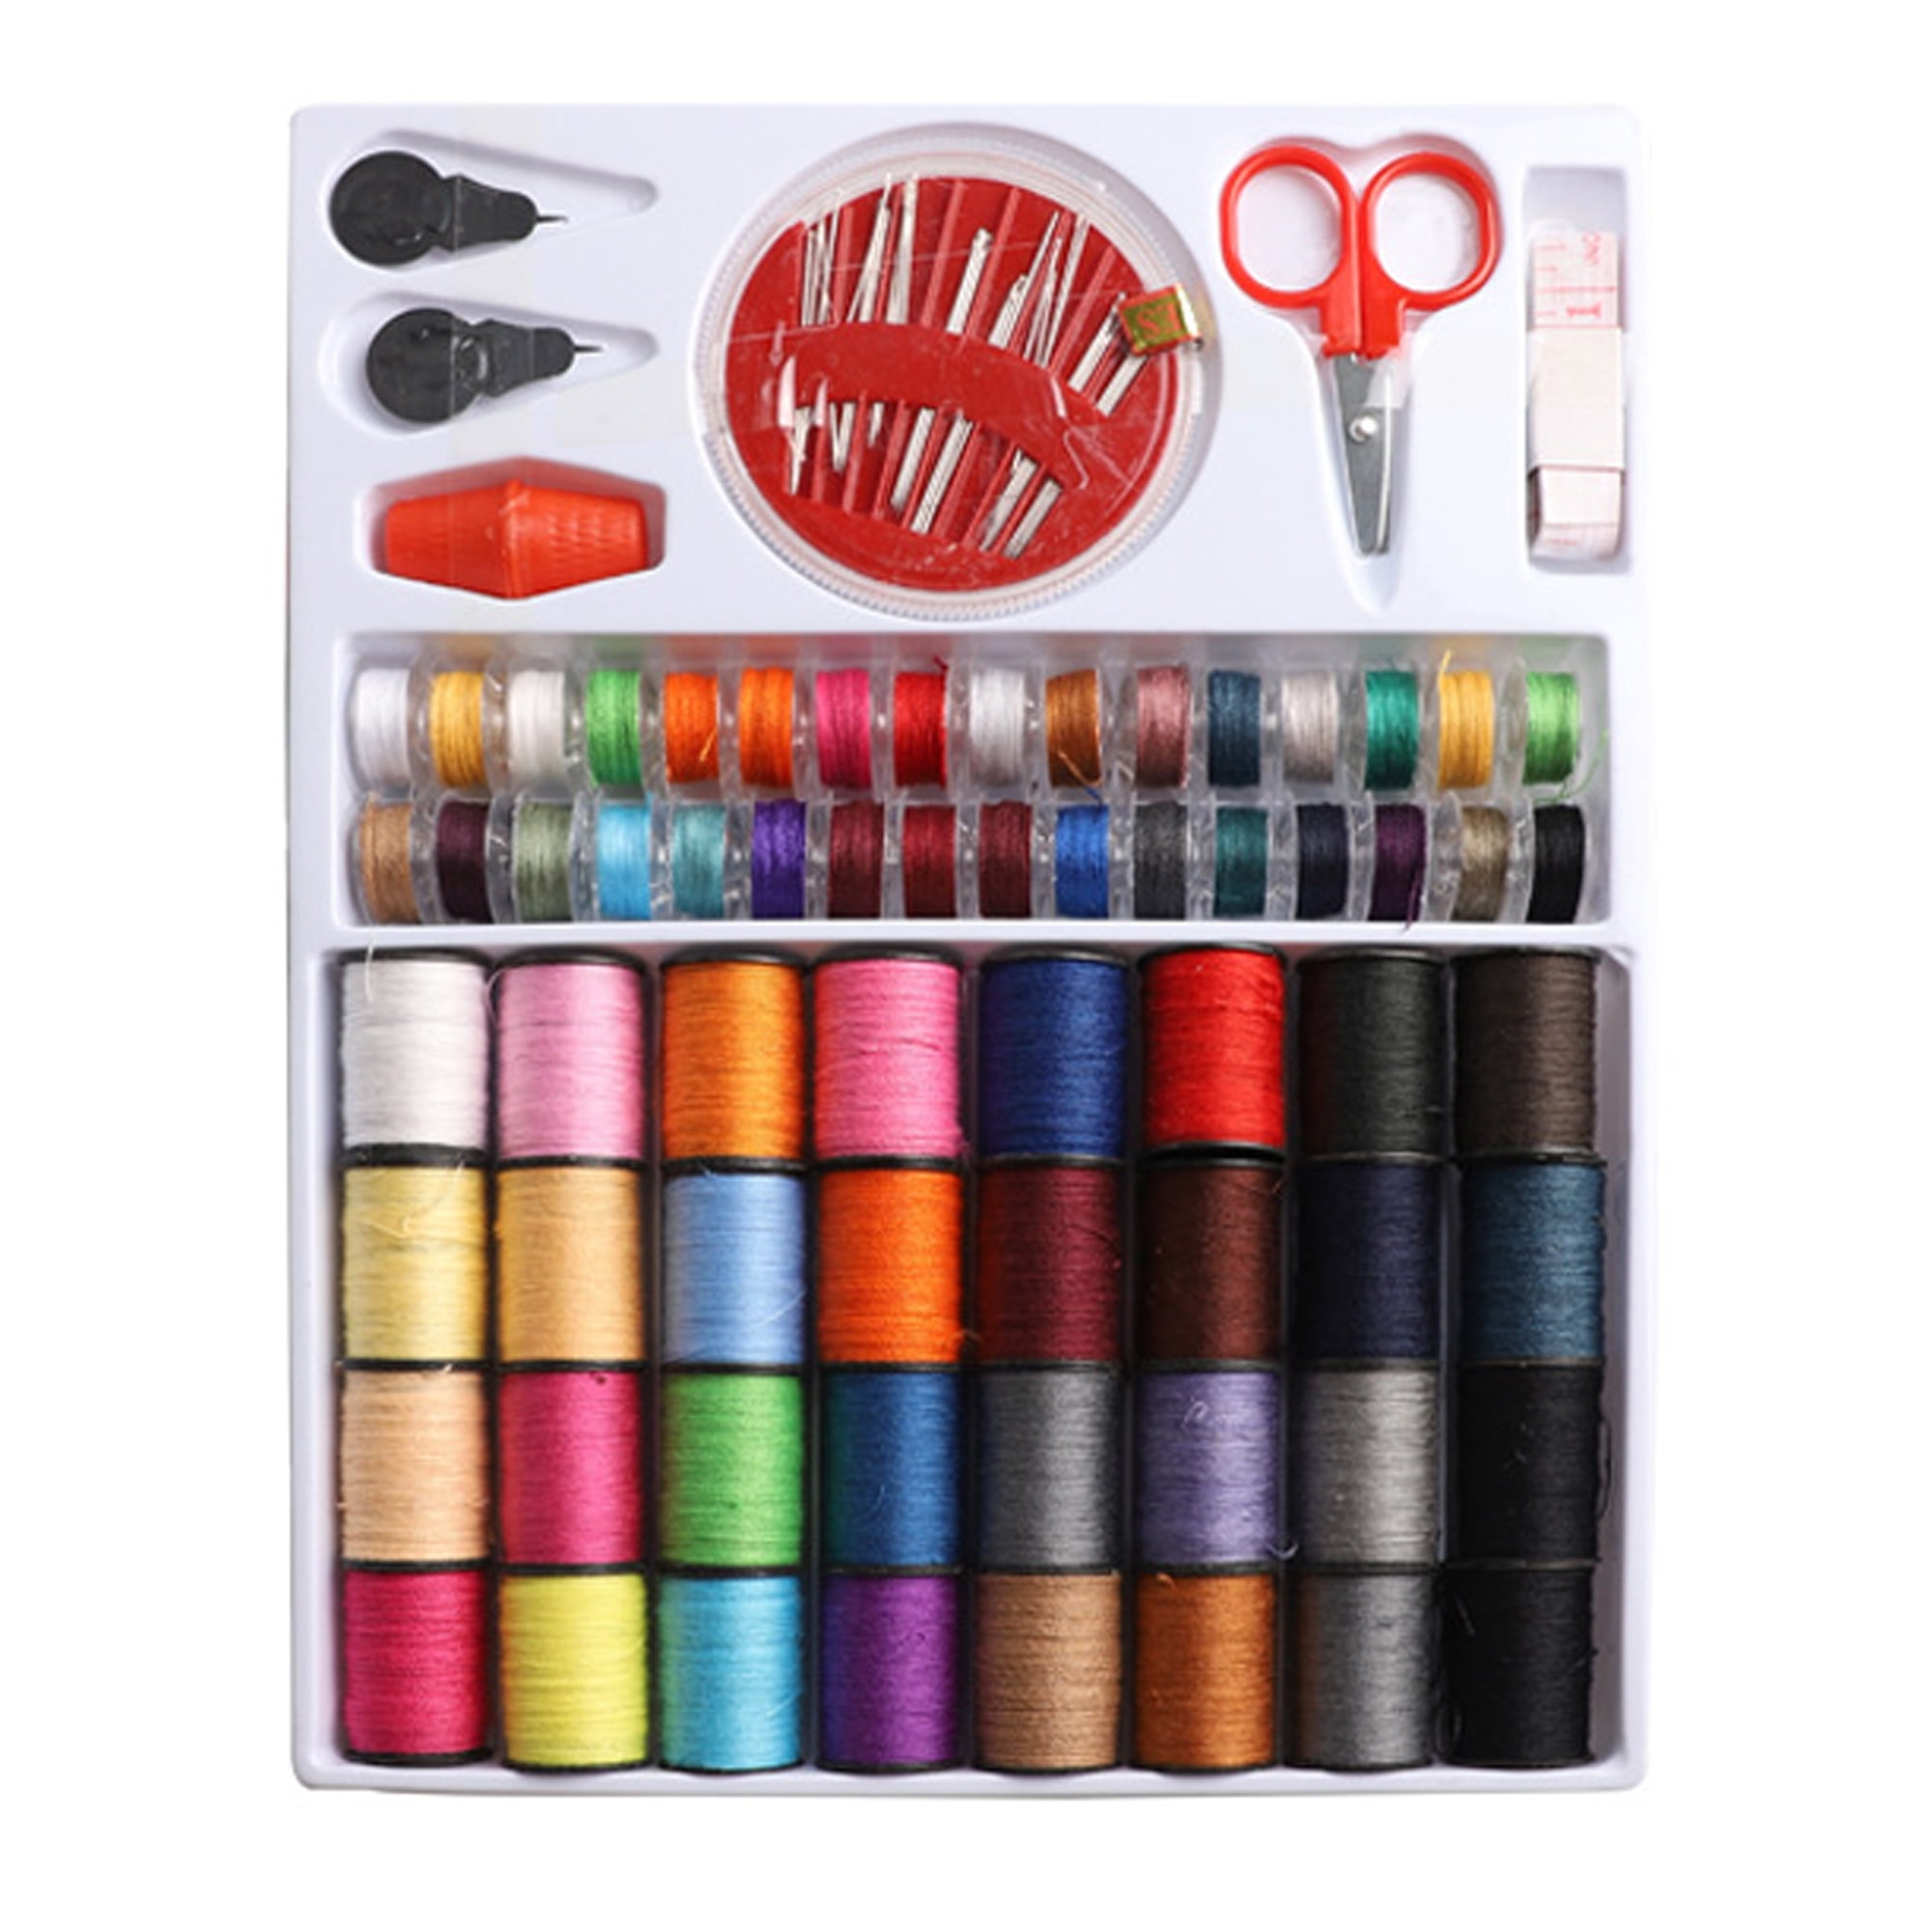 Sewing Kit Gifts for Women, Mom, Traveler, Adults, Emergency, Sewing  Supplies With Scissors, Thimble, Thread, Sewing Needles, Tape Measure 